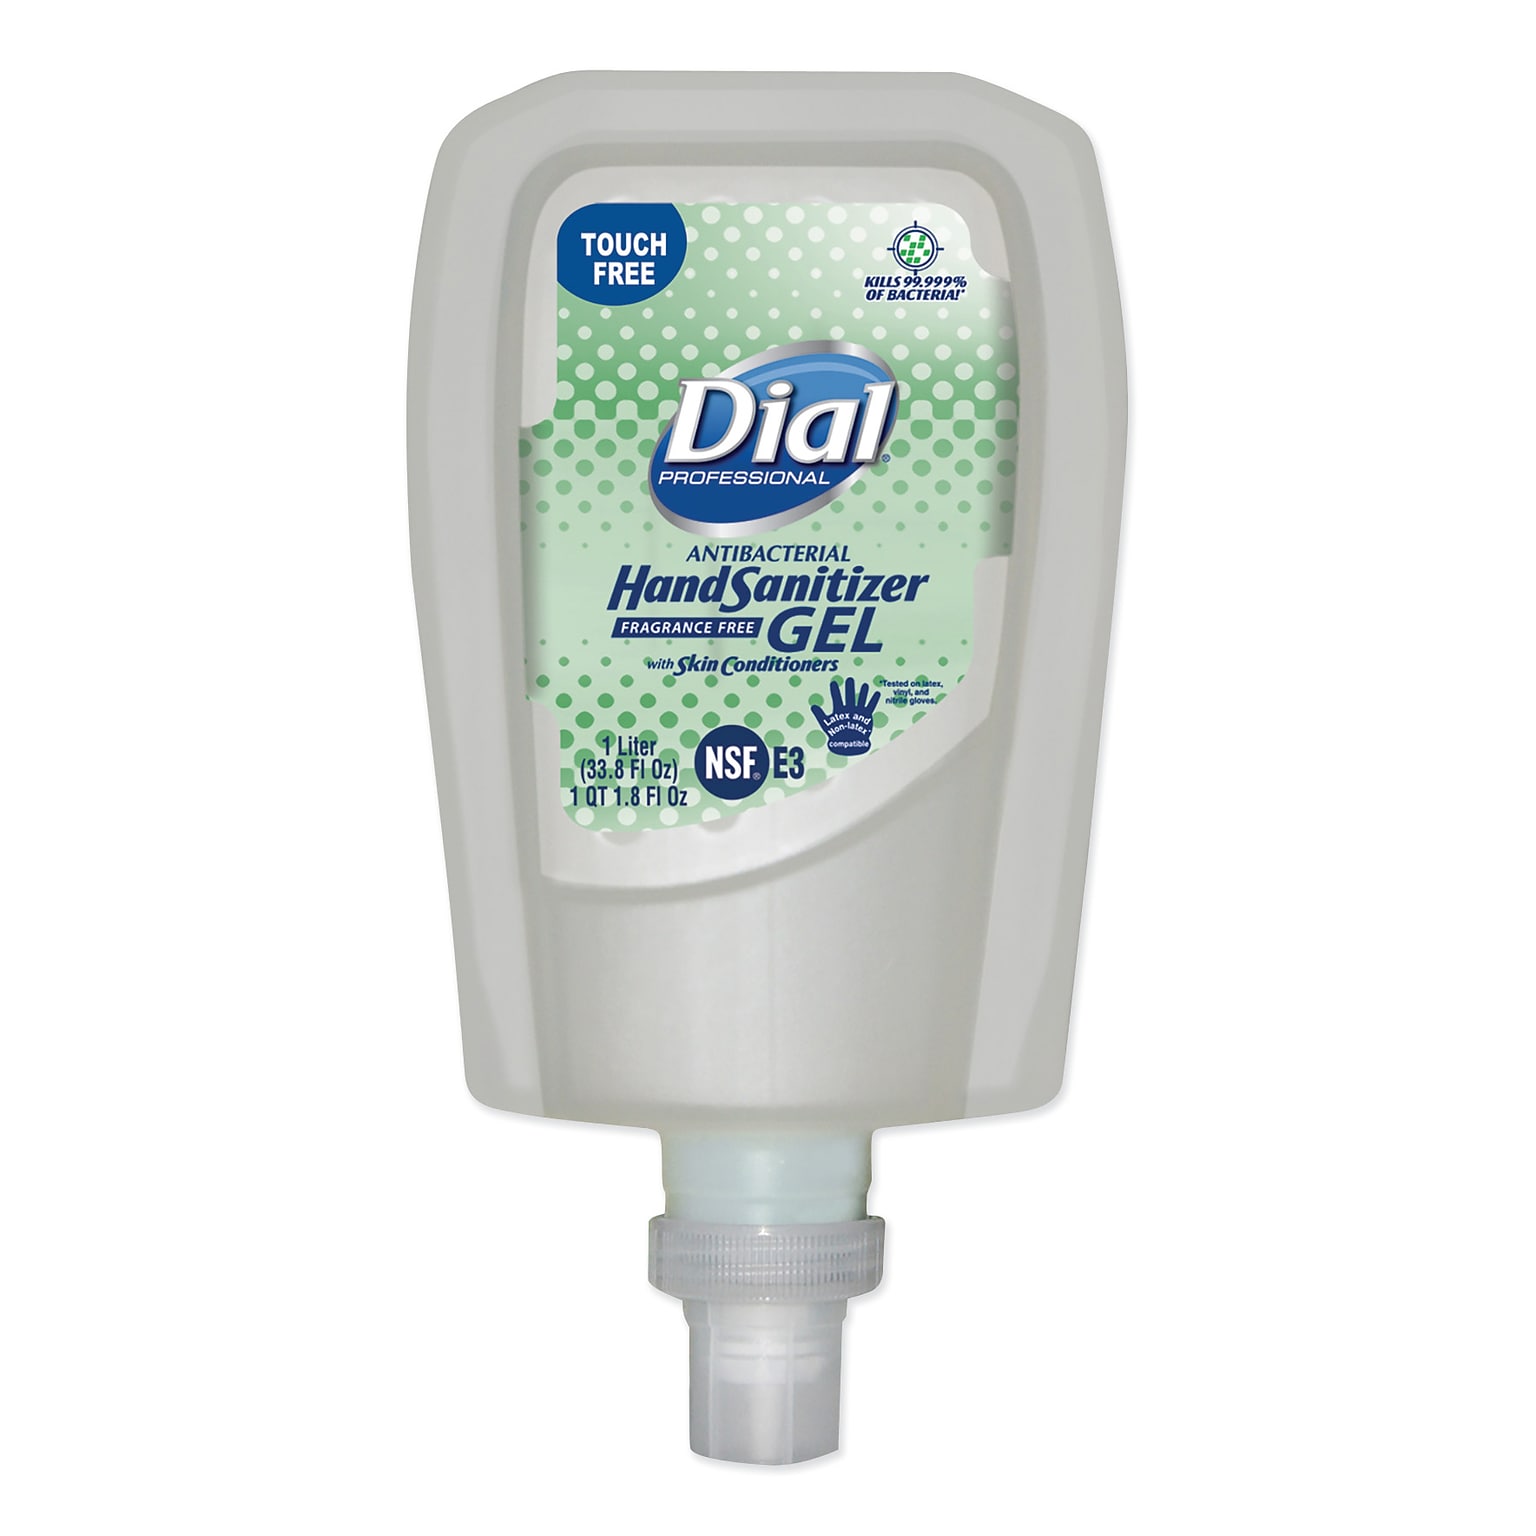 Dial® Professional Antibacterial Gel Hand Sanitizer Refill for FIT Touch Free Dispenser, Fragrance-F